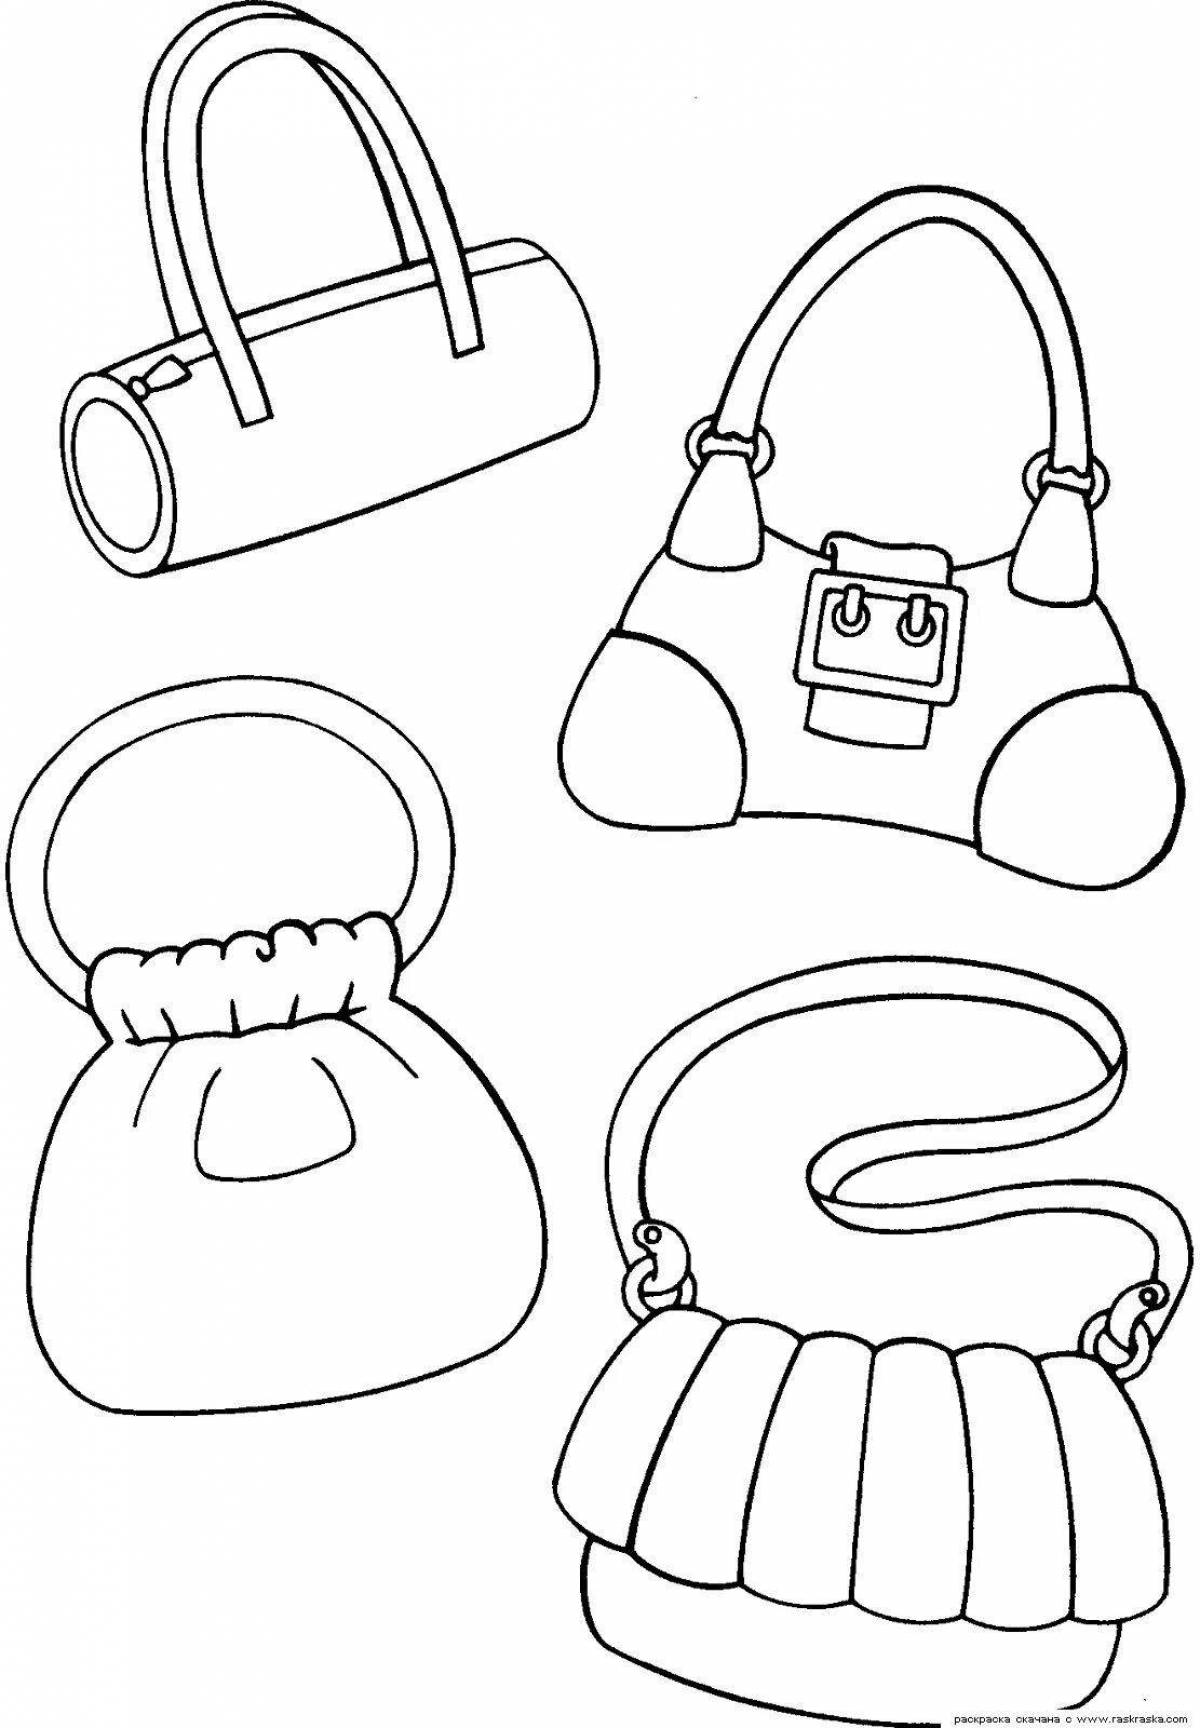 Exotic coloring pages for girls